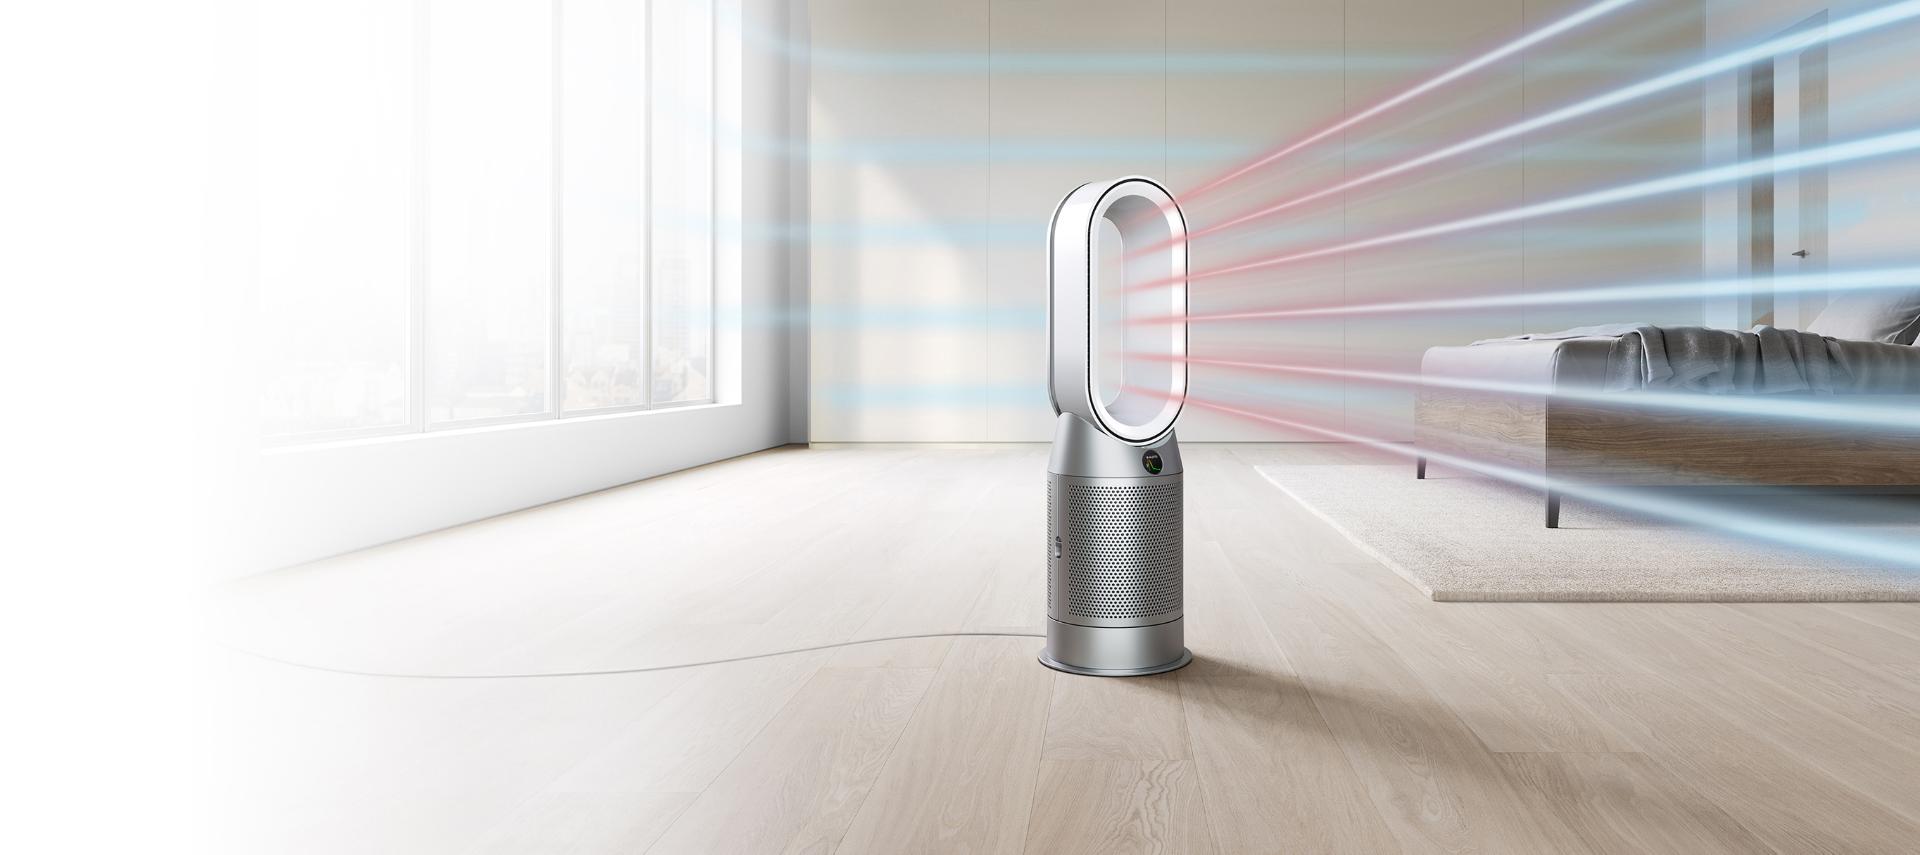 Dyson Purifier projecting heated purified air around a hotel room